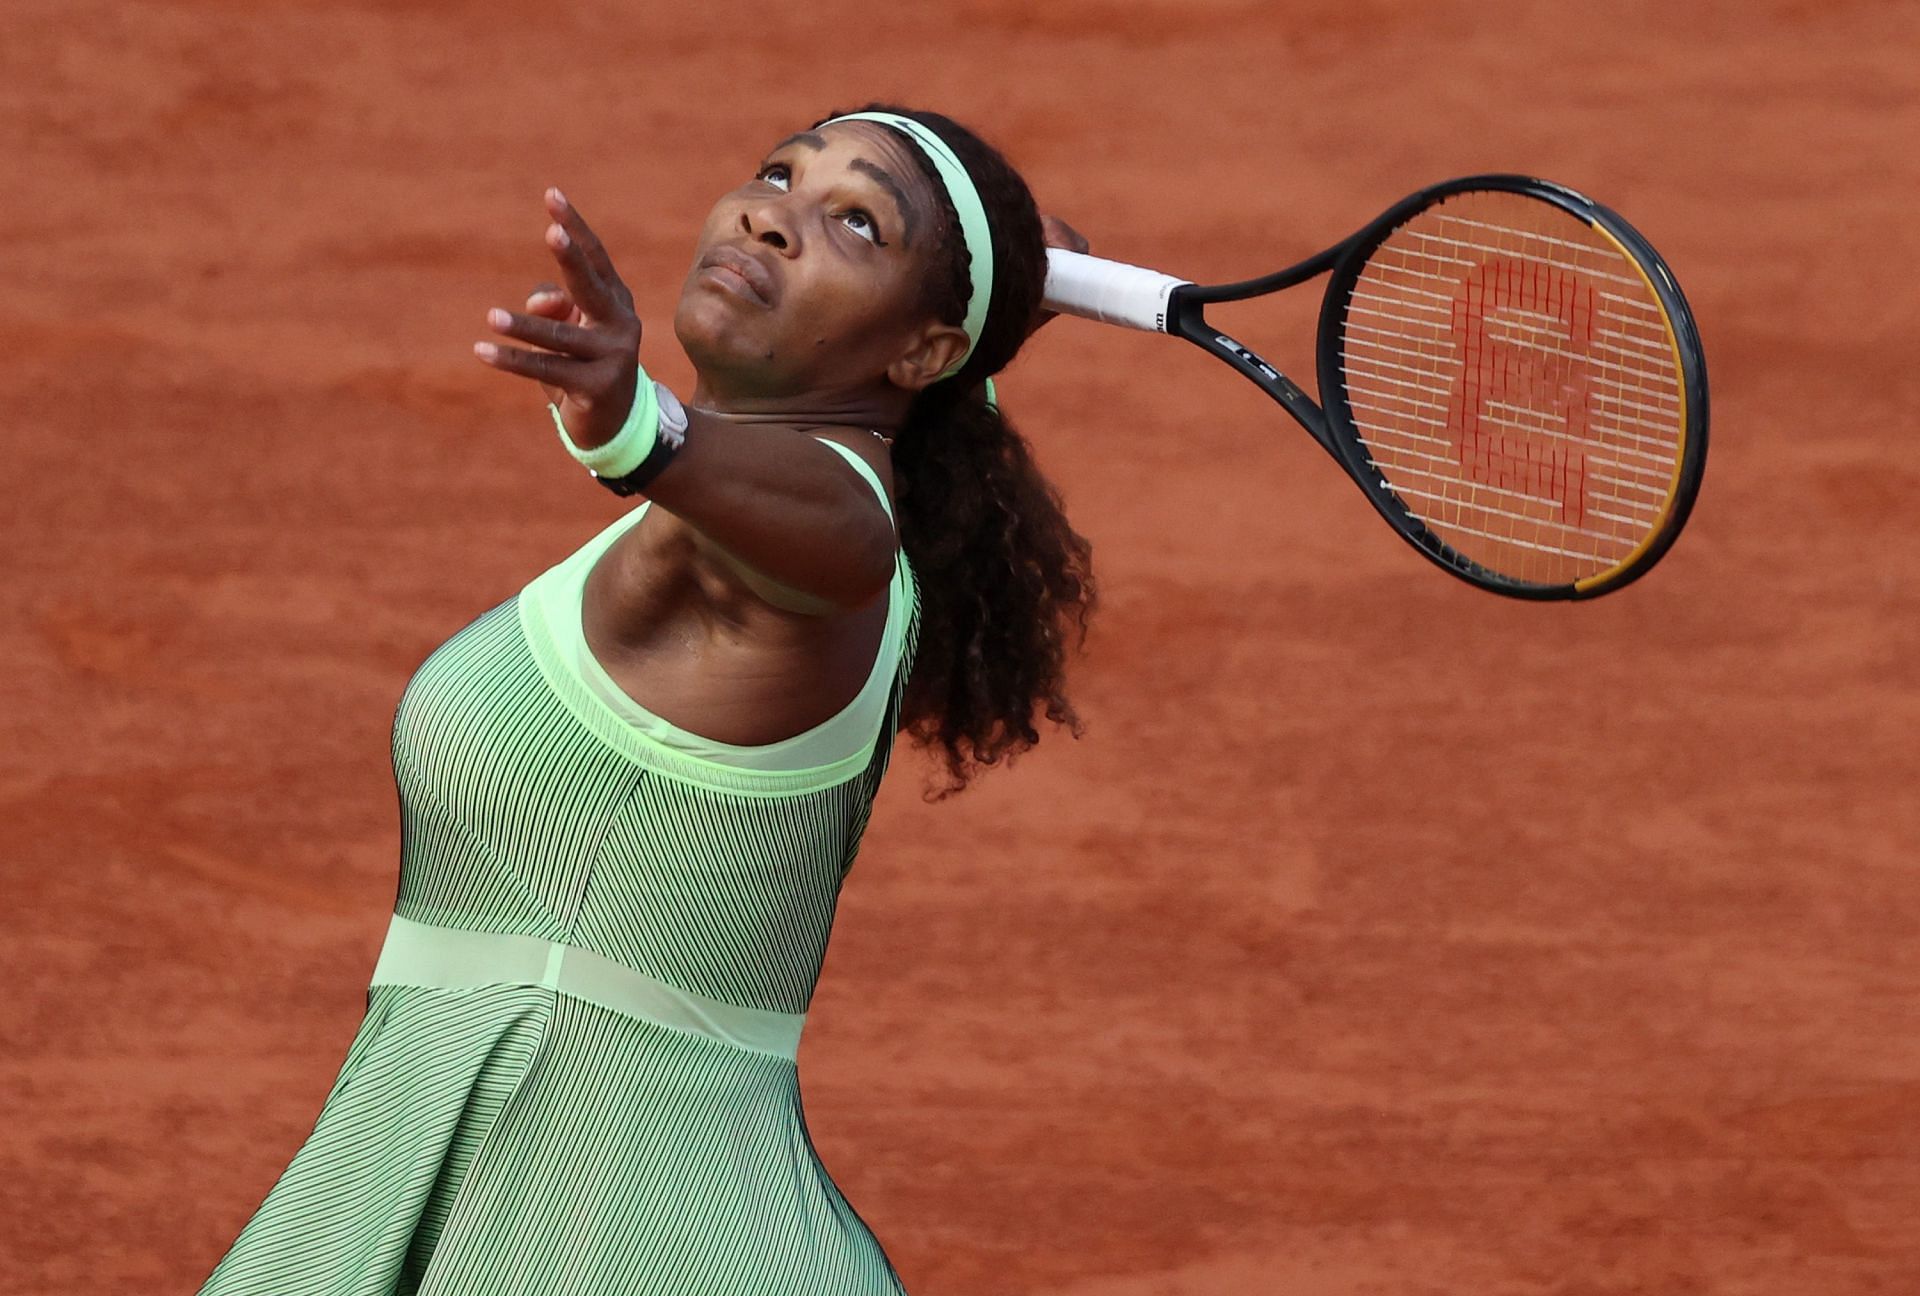 Serena Williams serves during the 2021 French Open